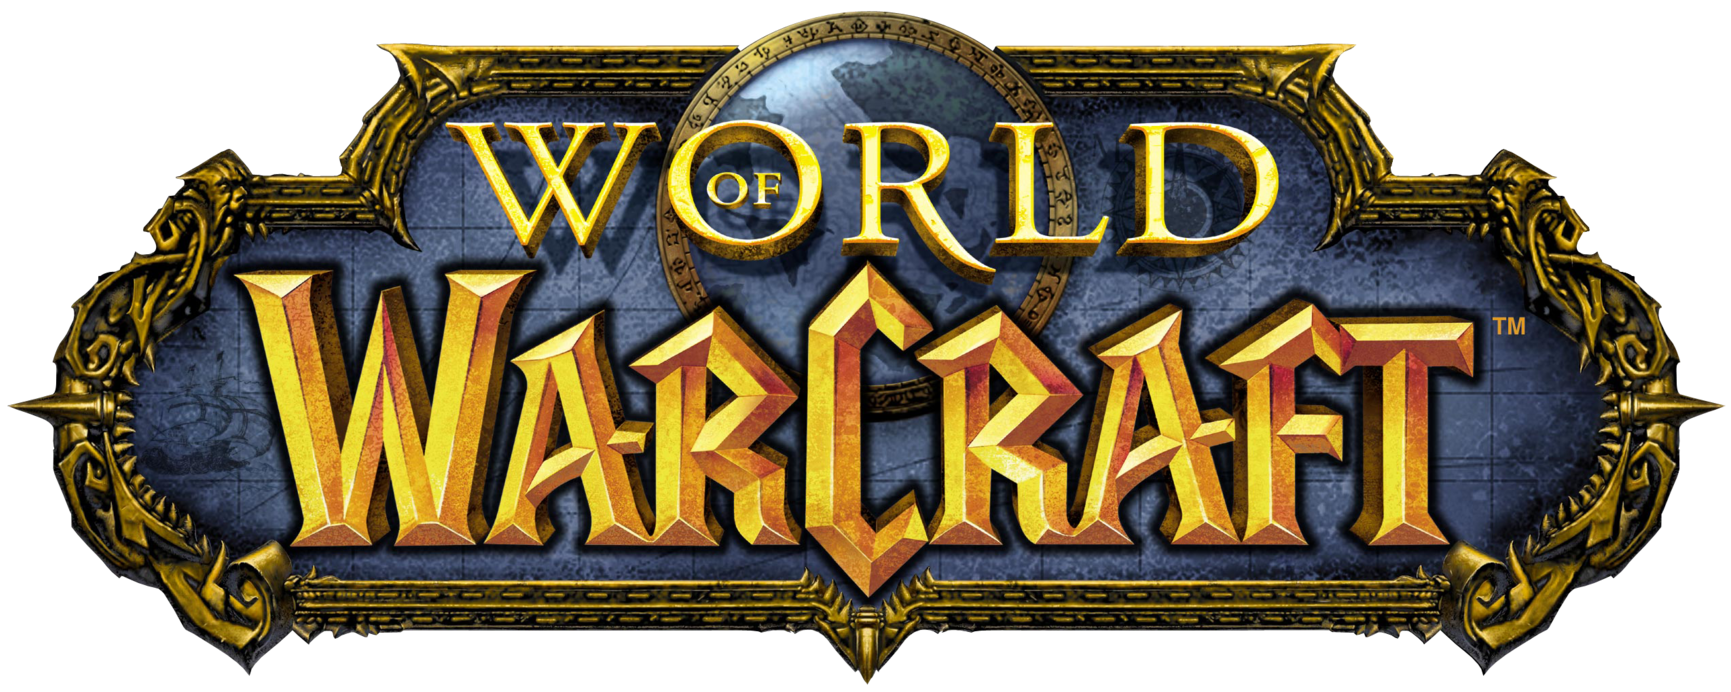 We need World of Warcraft 2 to put the 'WoW' in Warcraft